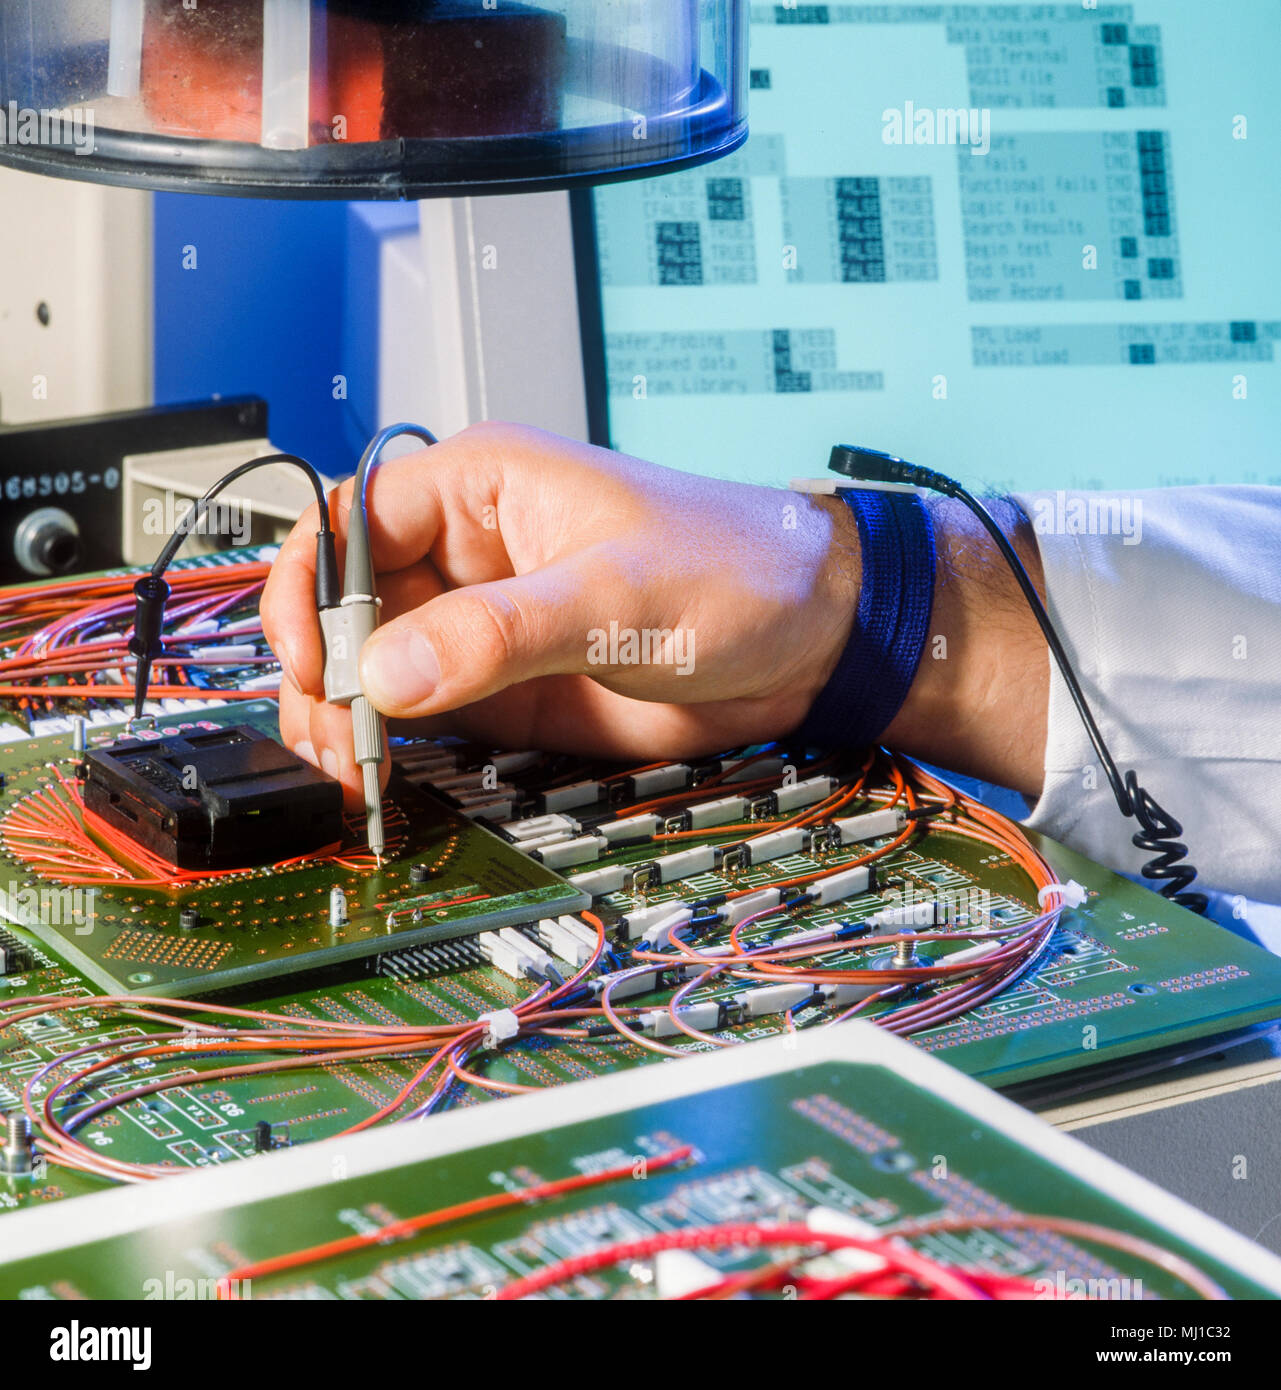 Hands working in a electronic test and analysis labratory Stock Photo